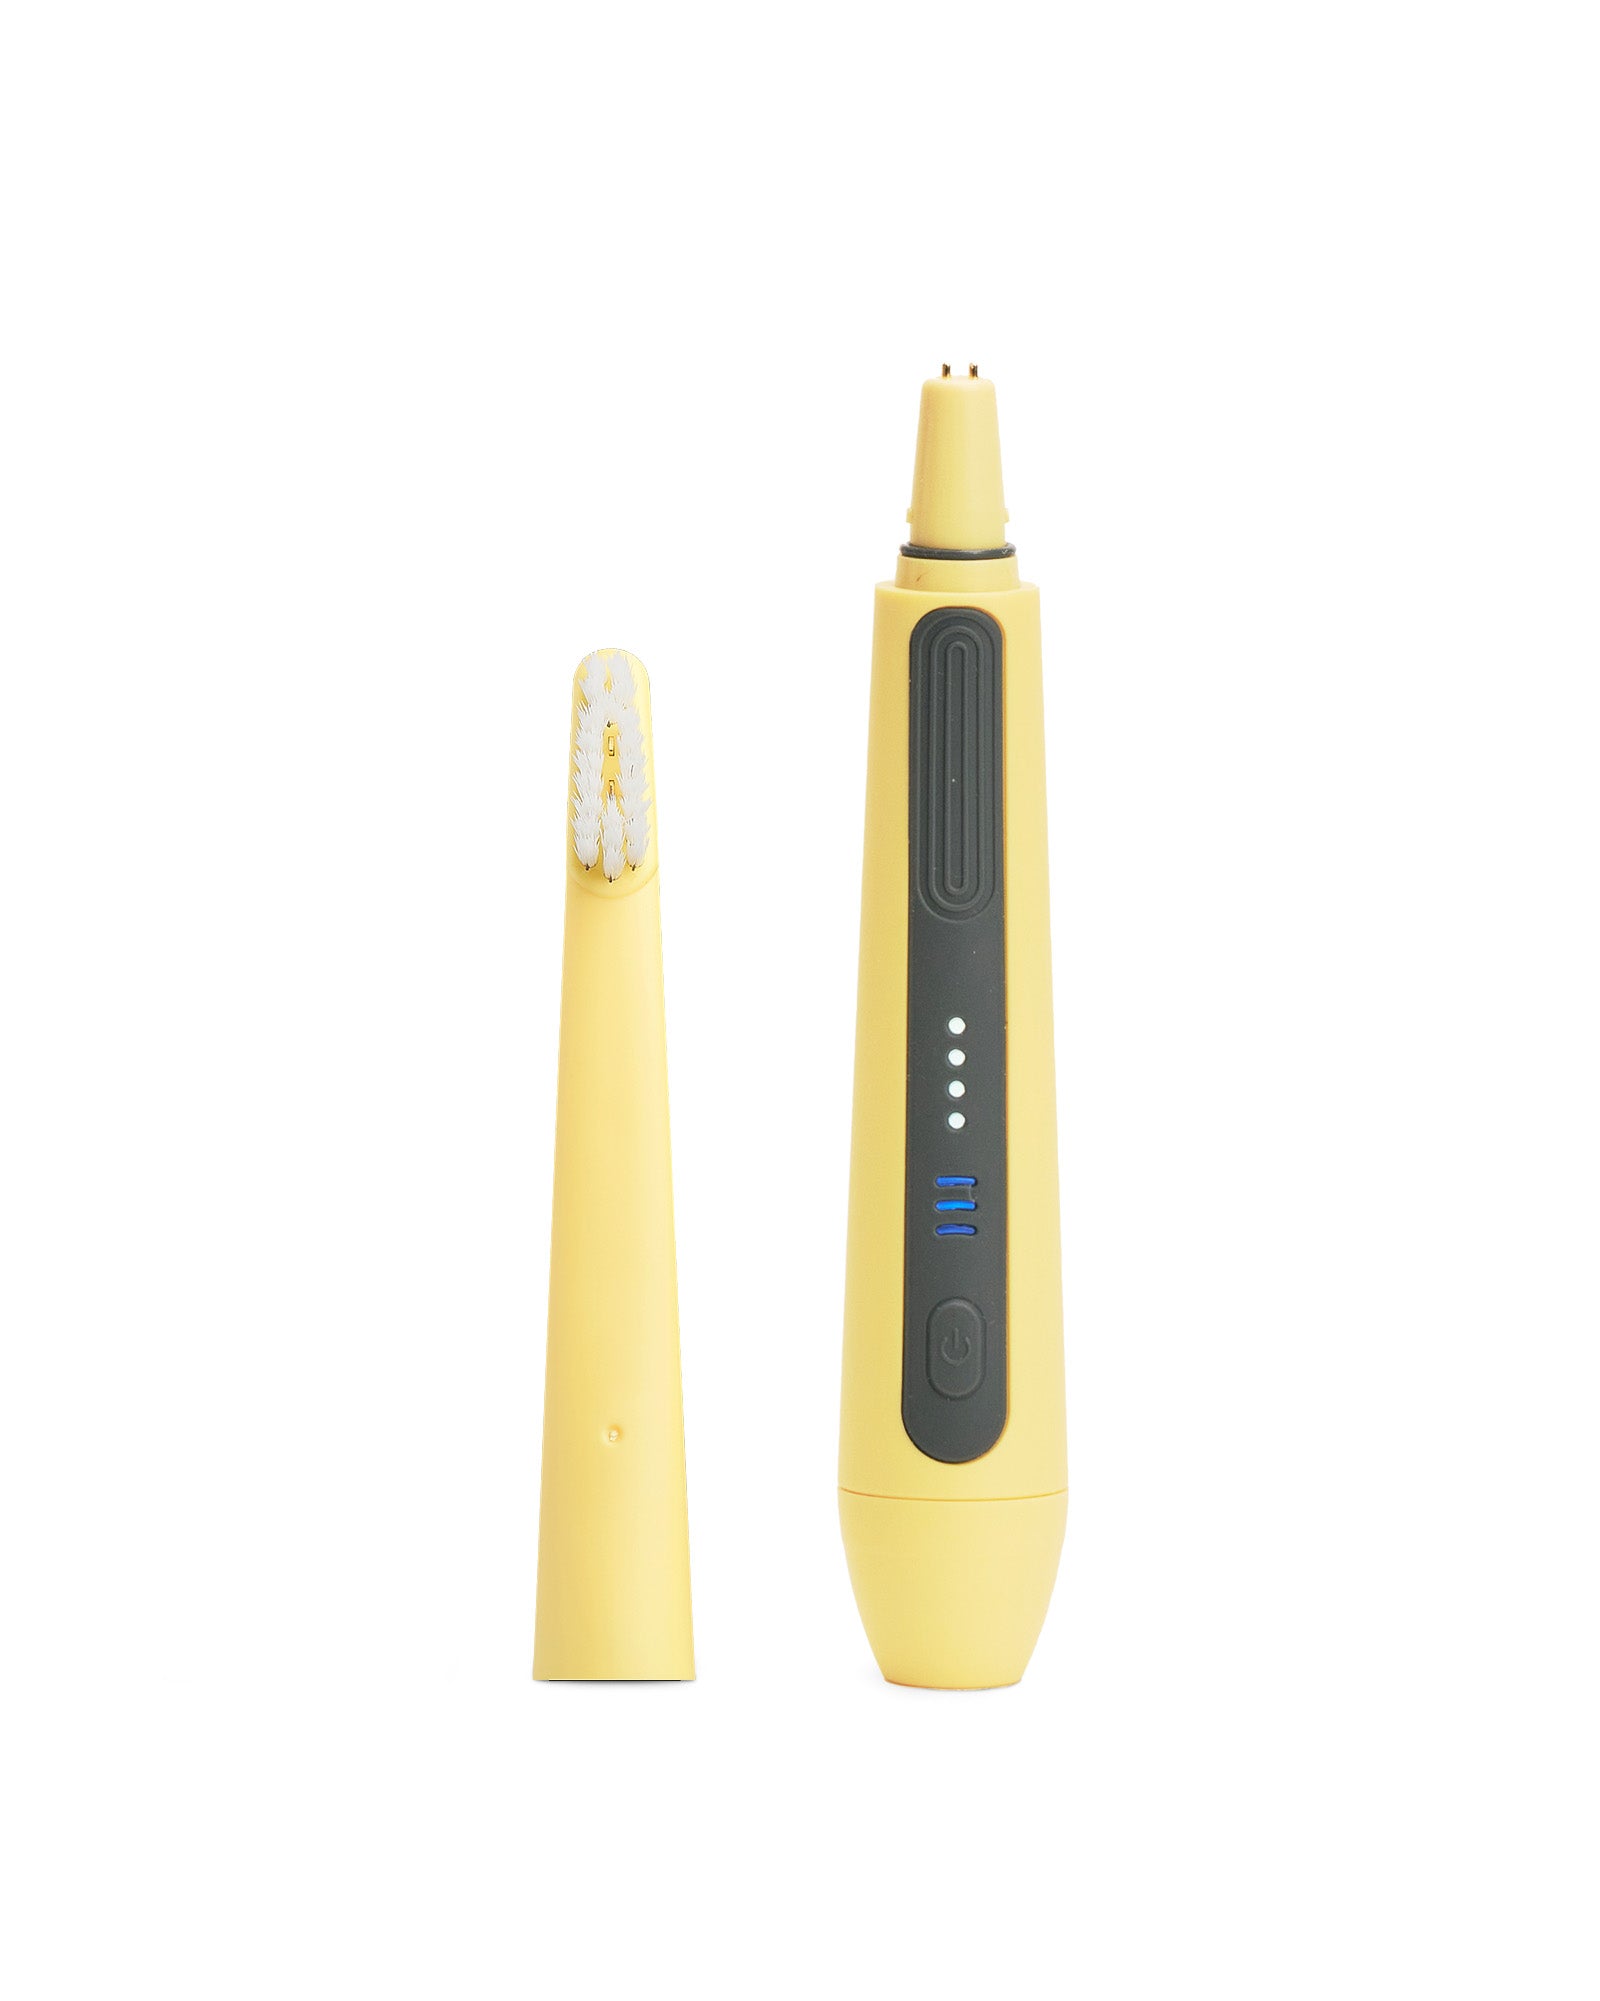 A replacement brush head for the Oreze toothbrush in canary yellow